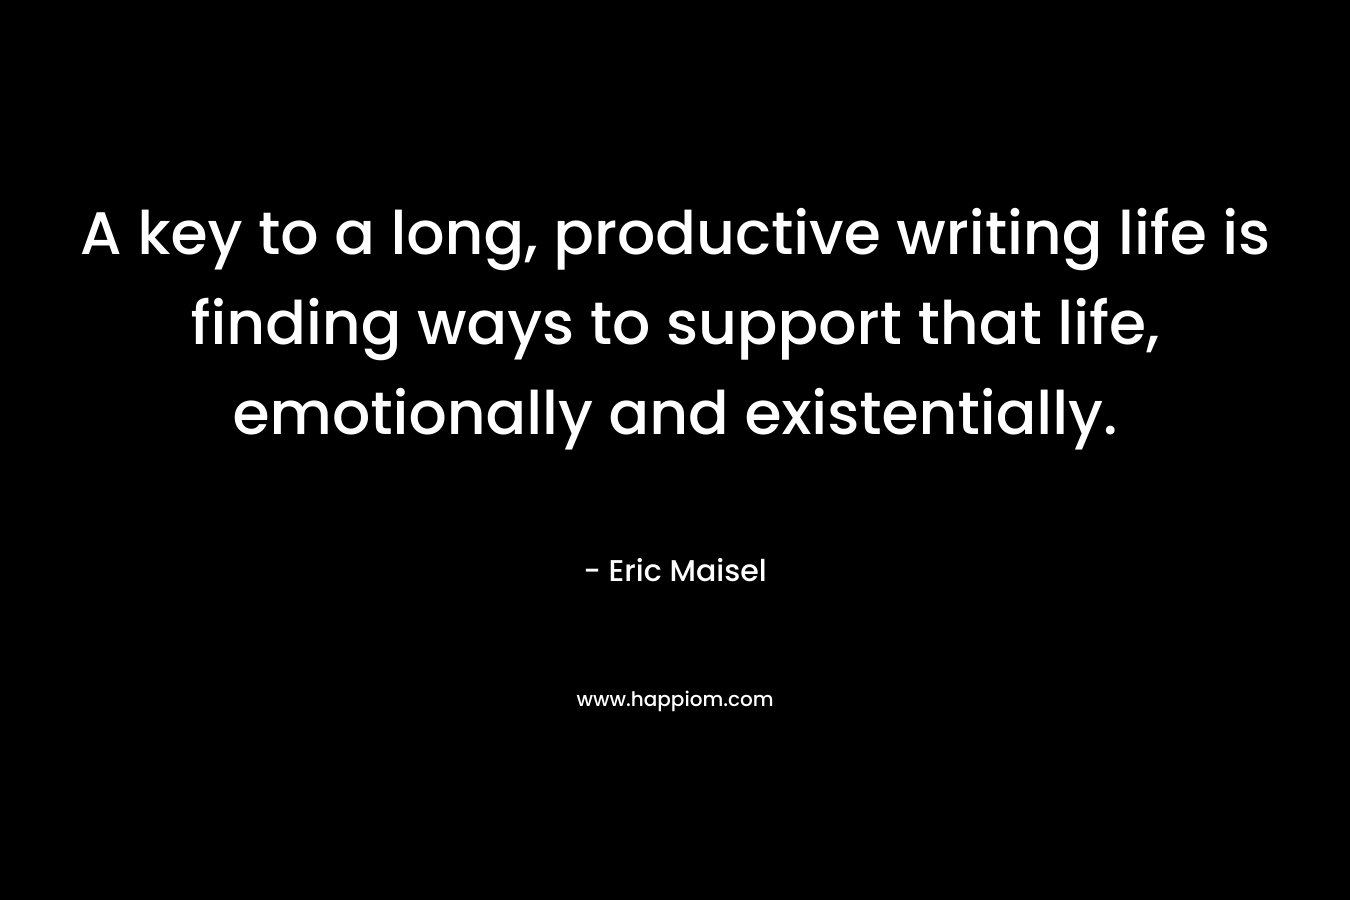 A key to a long, productive writing life is finding ways to support that life, emotionally and existentially. – Eric Maisel